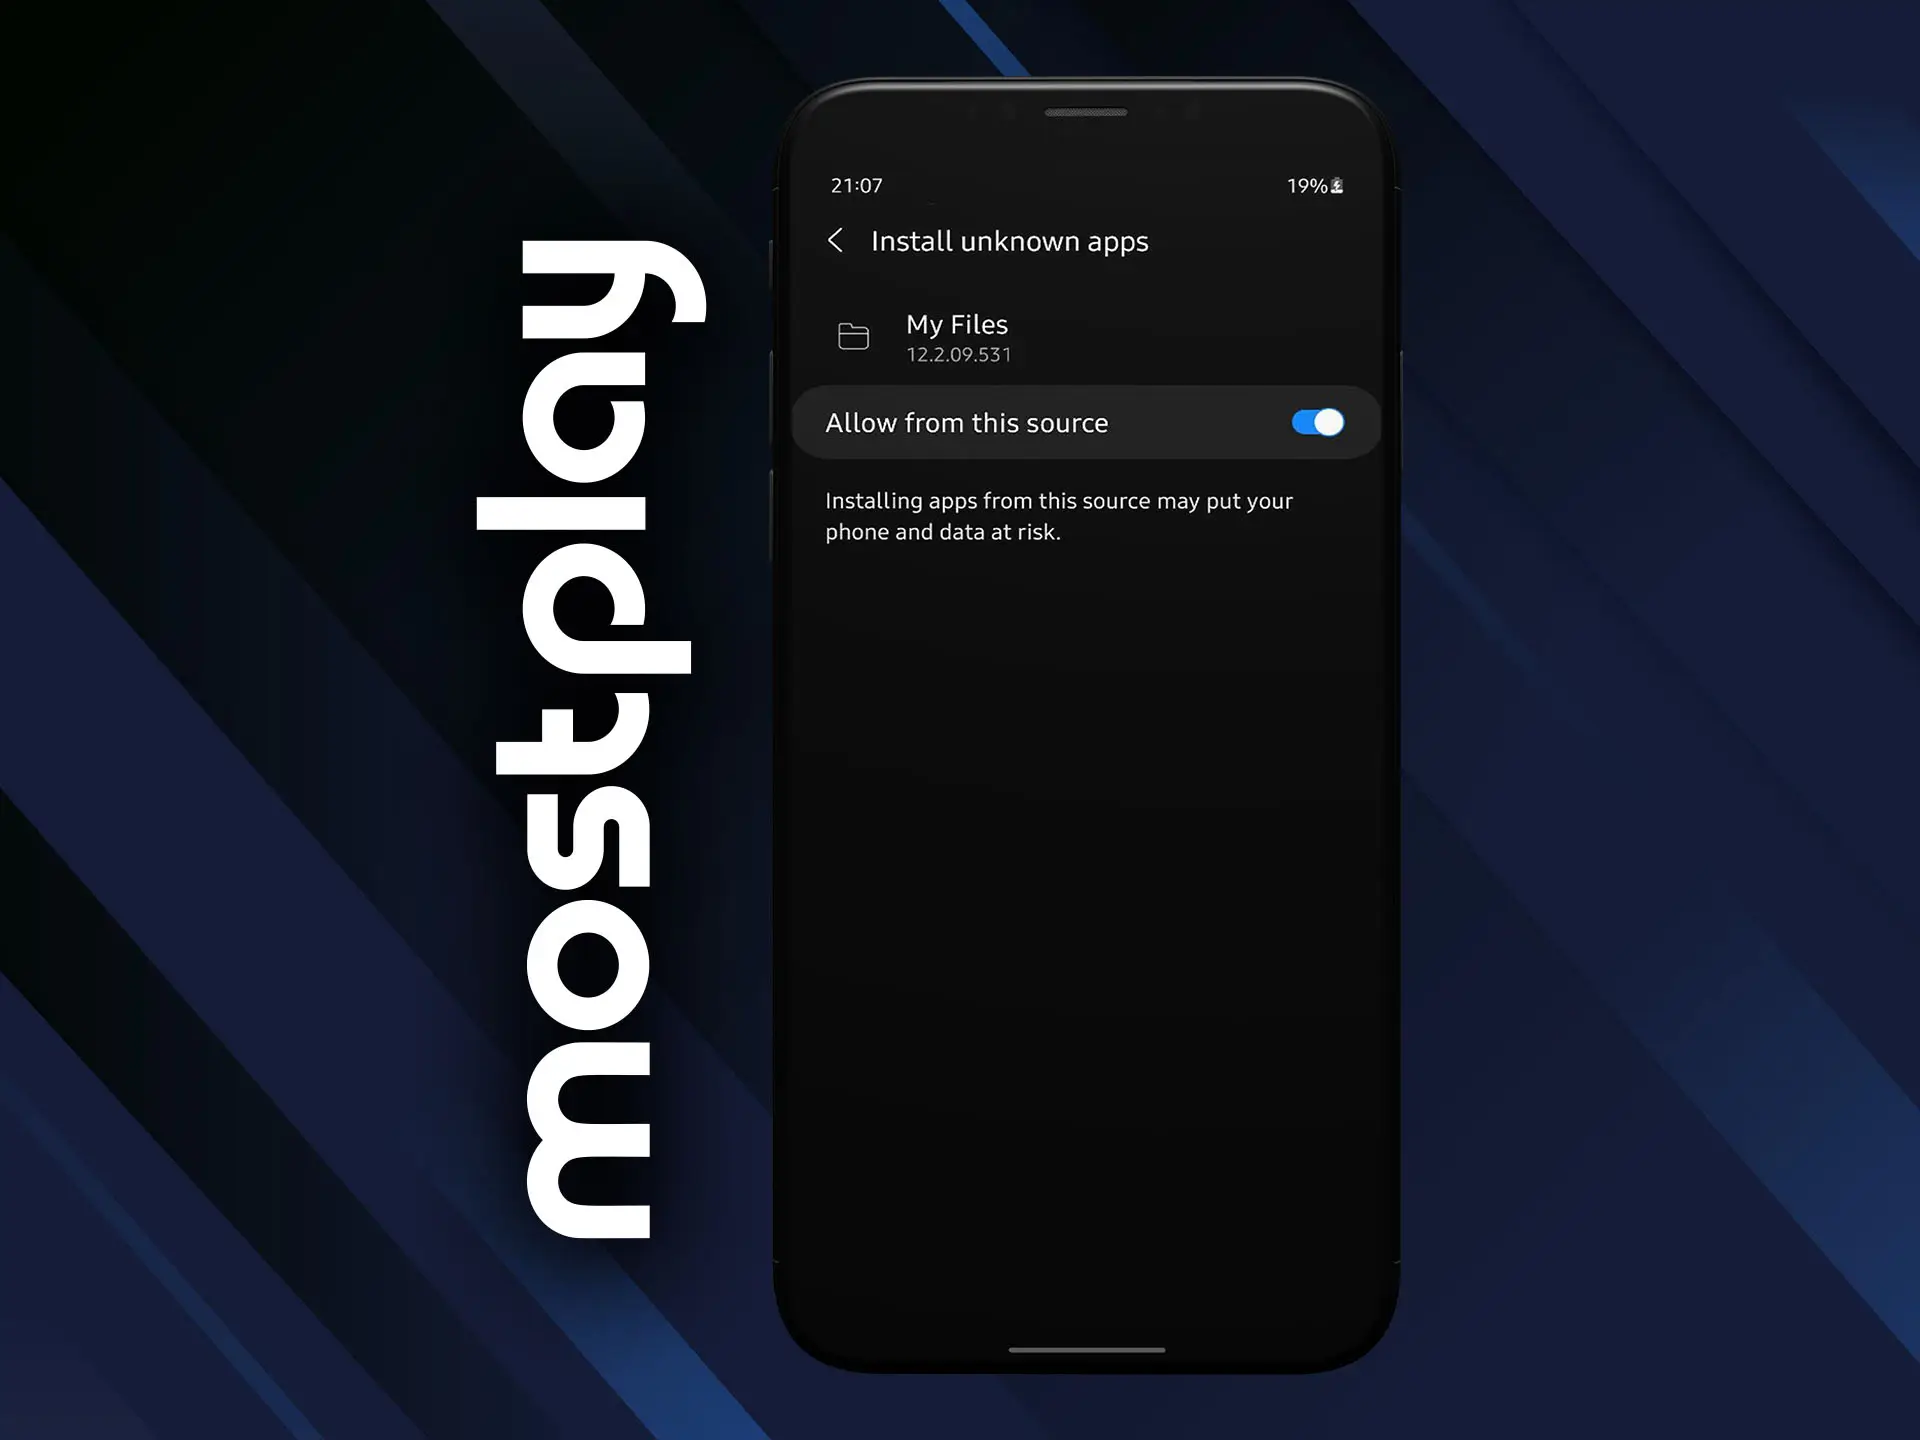 Disable security setting and start installation of Mostplay app.